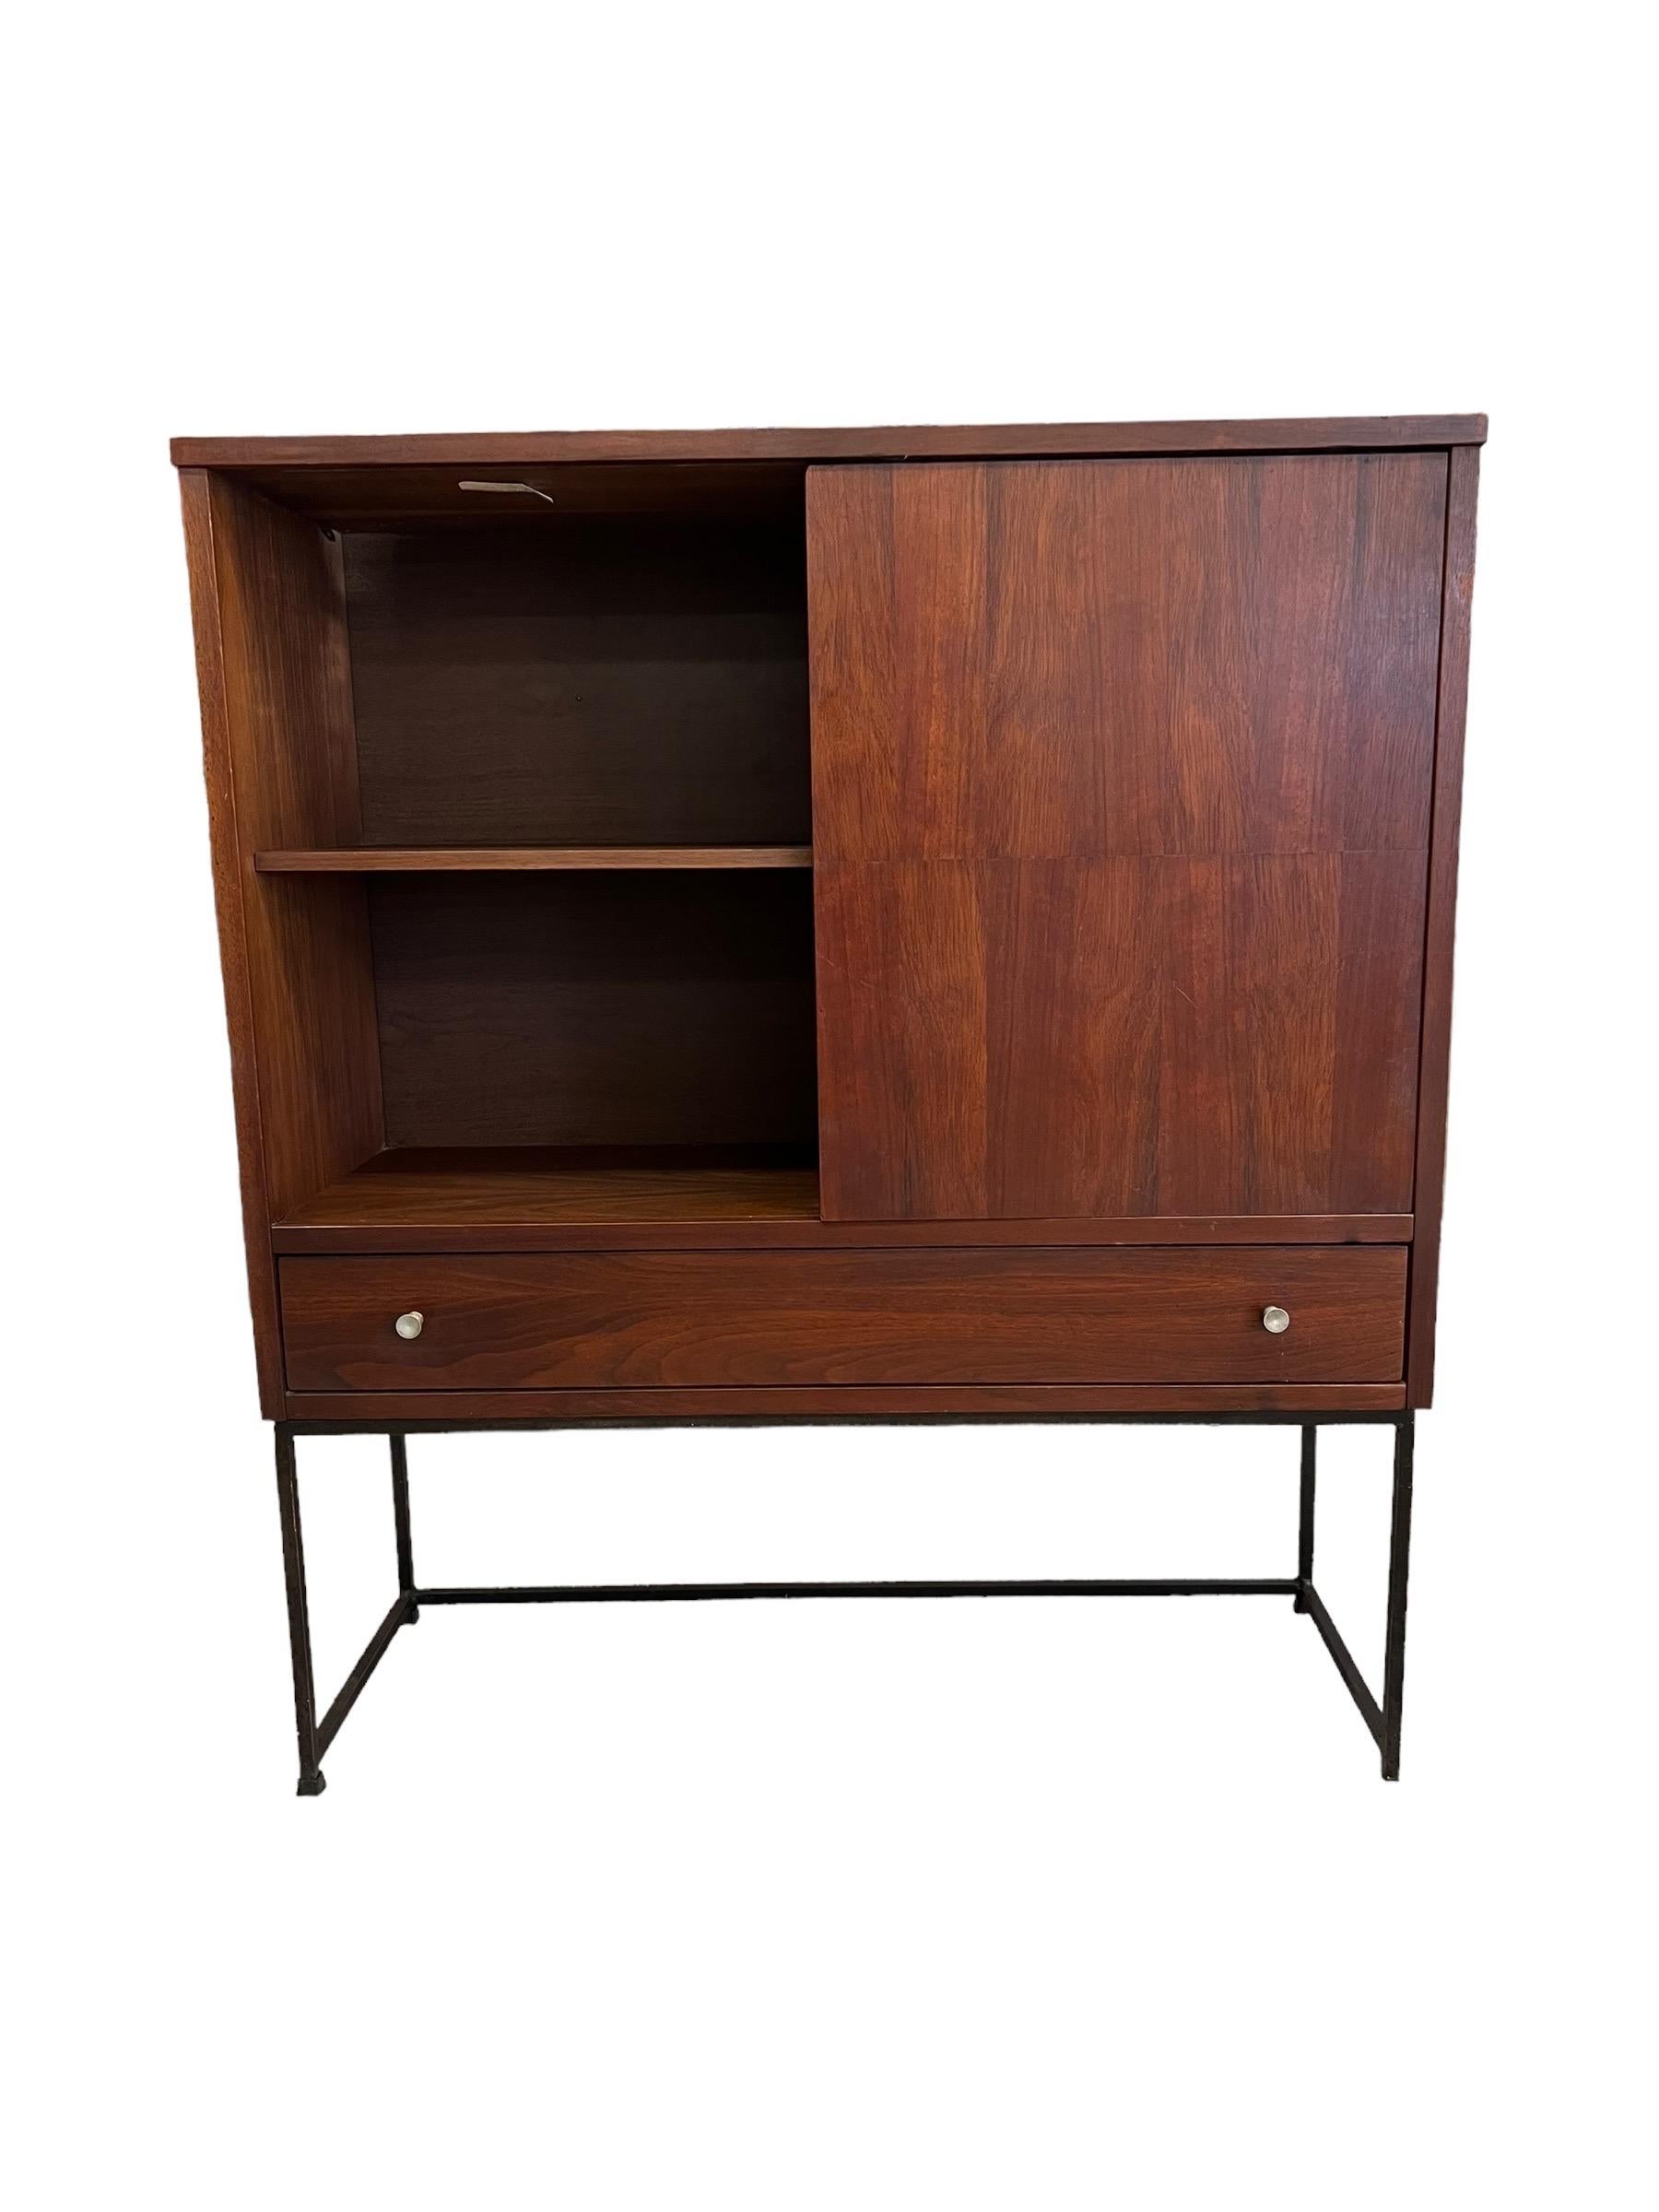 Walnut Toned Bookshelf with dovetailed drawers and original finish. Mid Century Design by Stanley Furniture. Makers mark on the left side of the drawer. Vintage Condition Consistent with Age as Pictured. Circa 1970s.

Dimensions: 36W 12D 41H